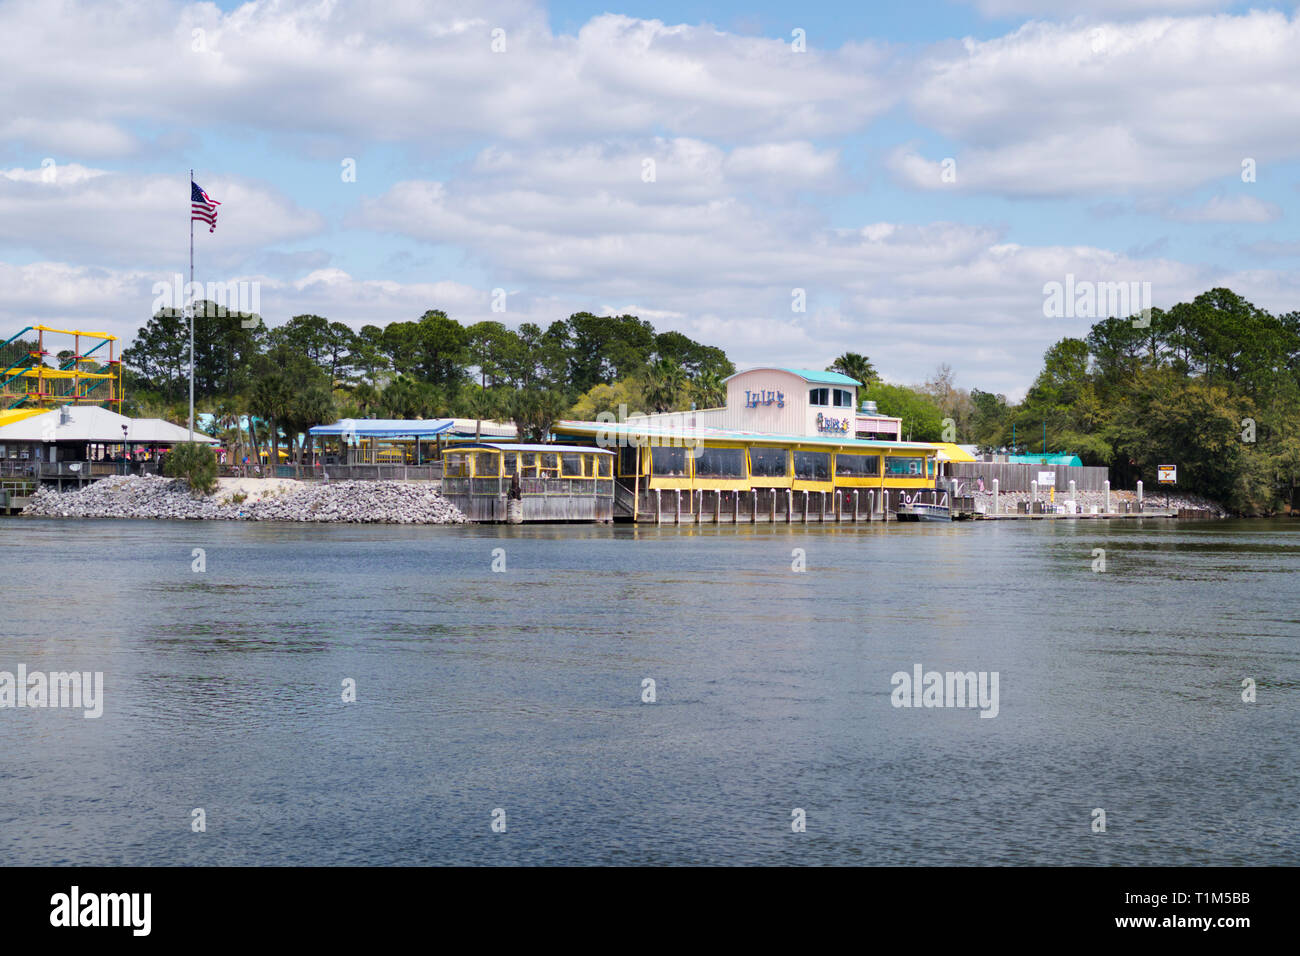 Lulu's restaurant from the southside of the Intracoastal Waterway in Gulf Shores, Alabama, USA. Stock Photo